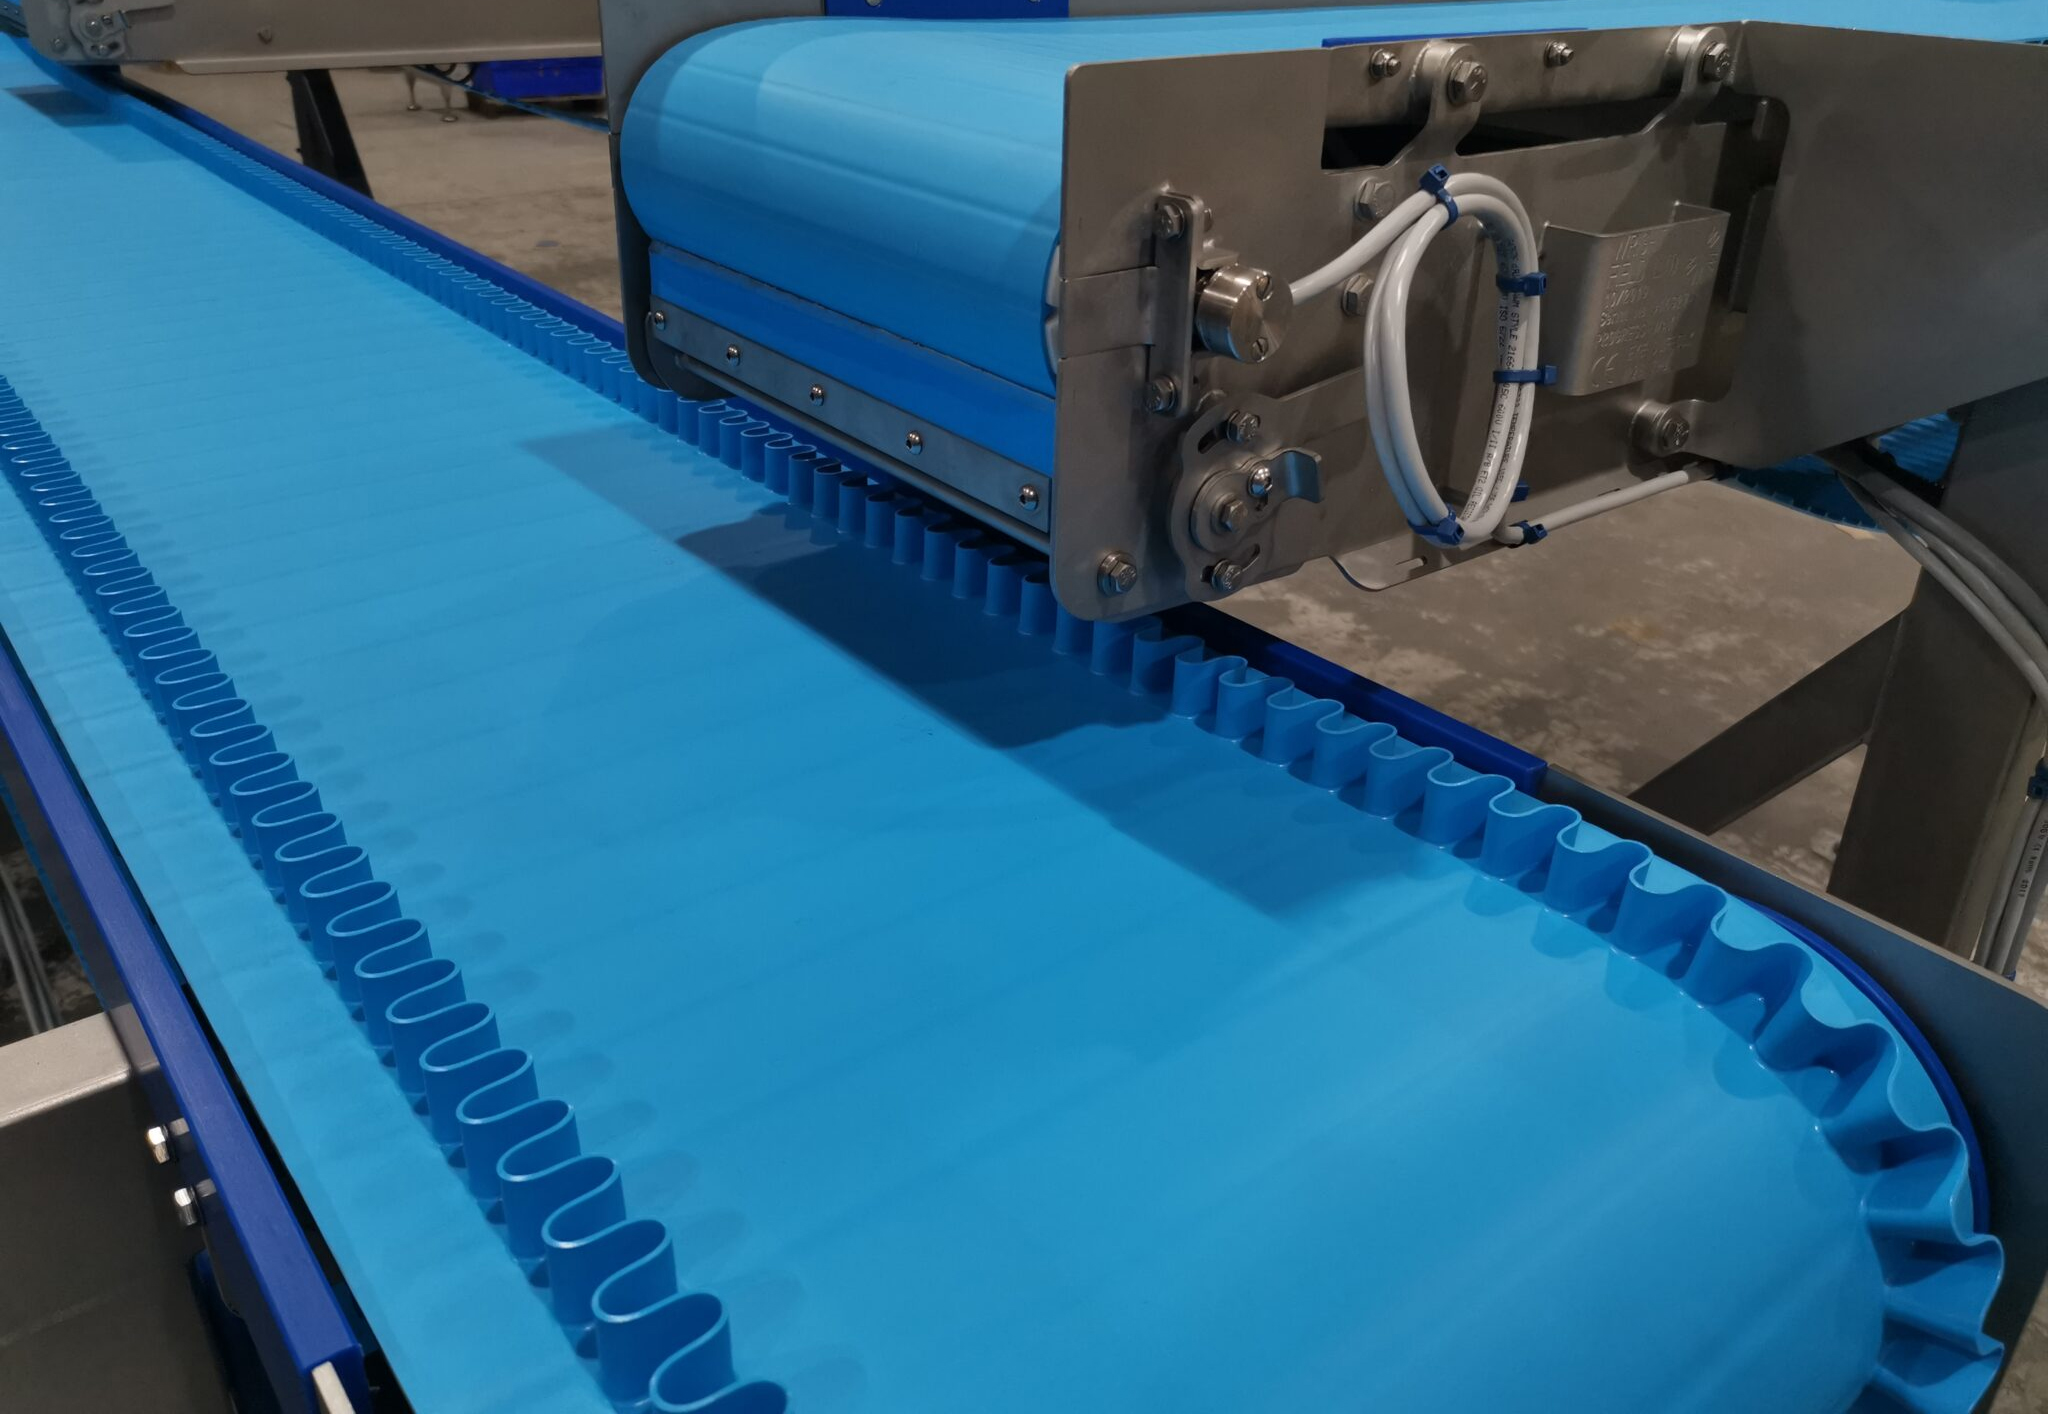 Thermodrive conveyor systems designed and built by Wrightfield